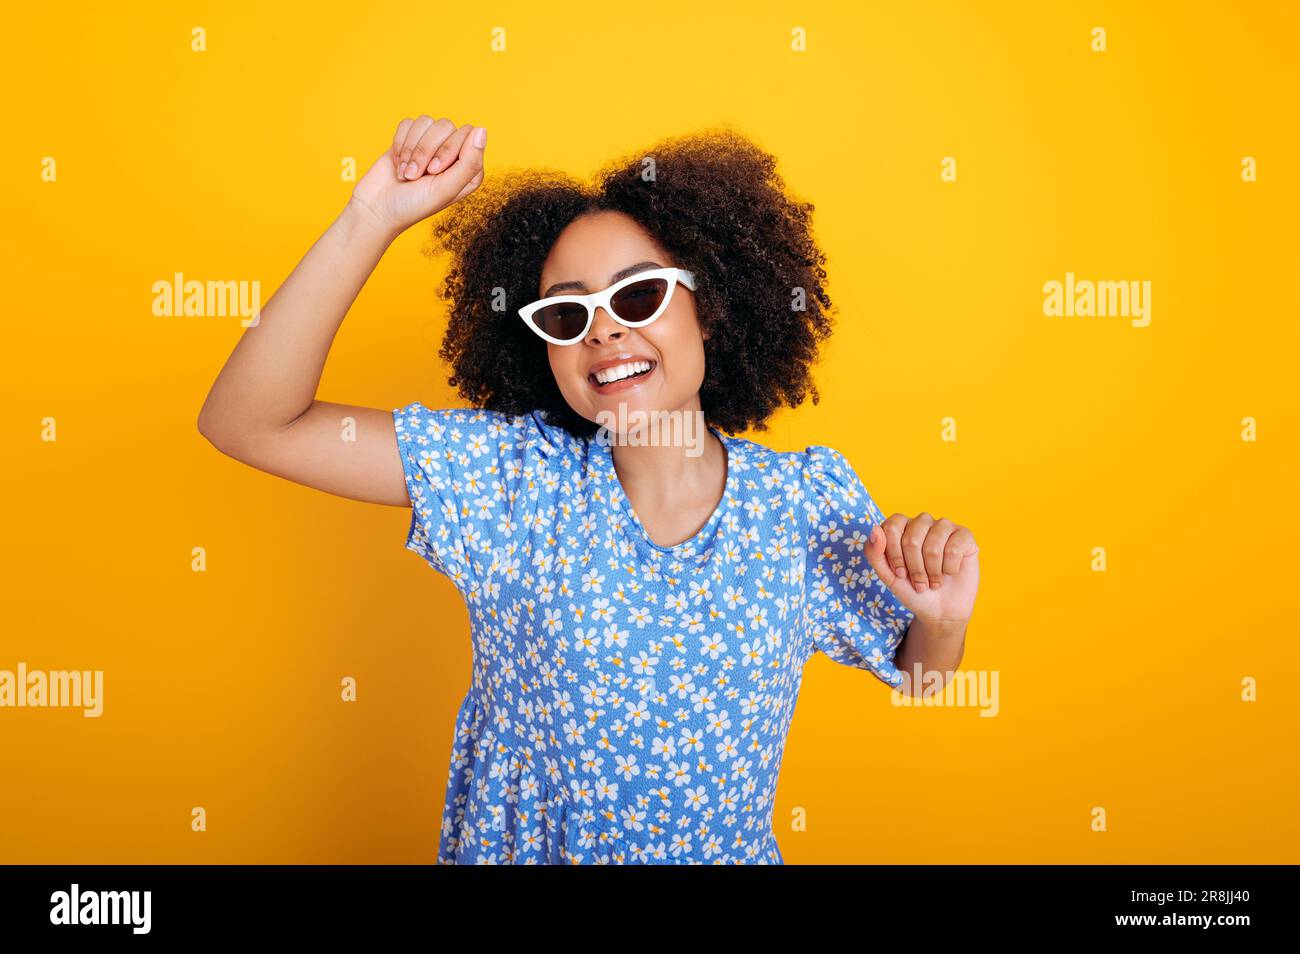 Joyful pretty fashionable curly haired brazilian or african american woman, in dress, with sunglasses, listens her favorite music, dancing, relaxing, having fun on isolated orange background, smiling Stock Photo